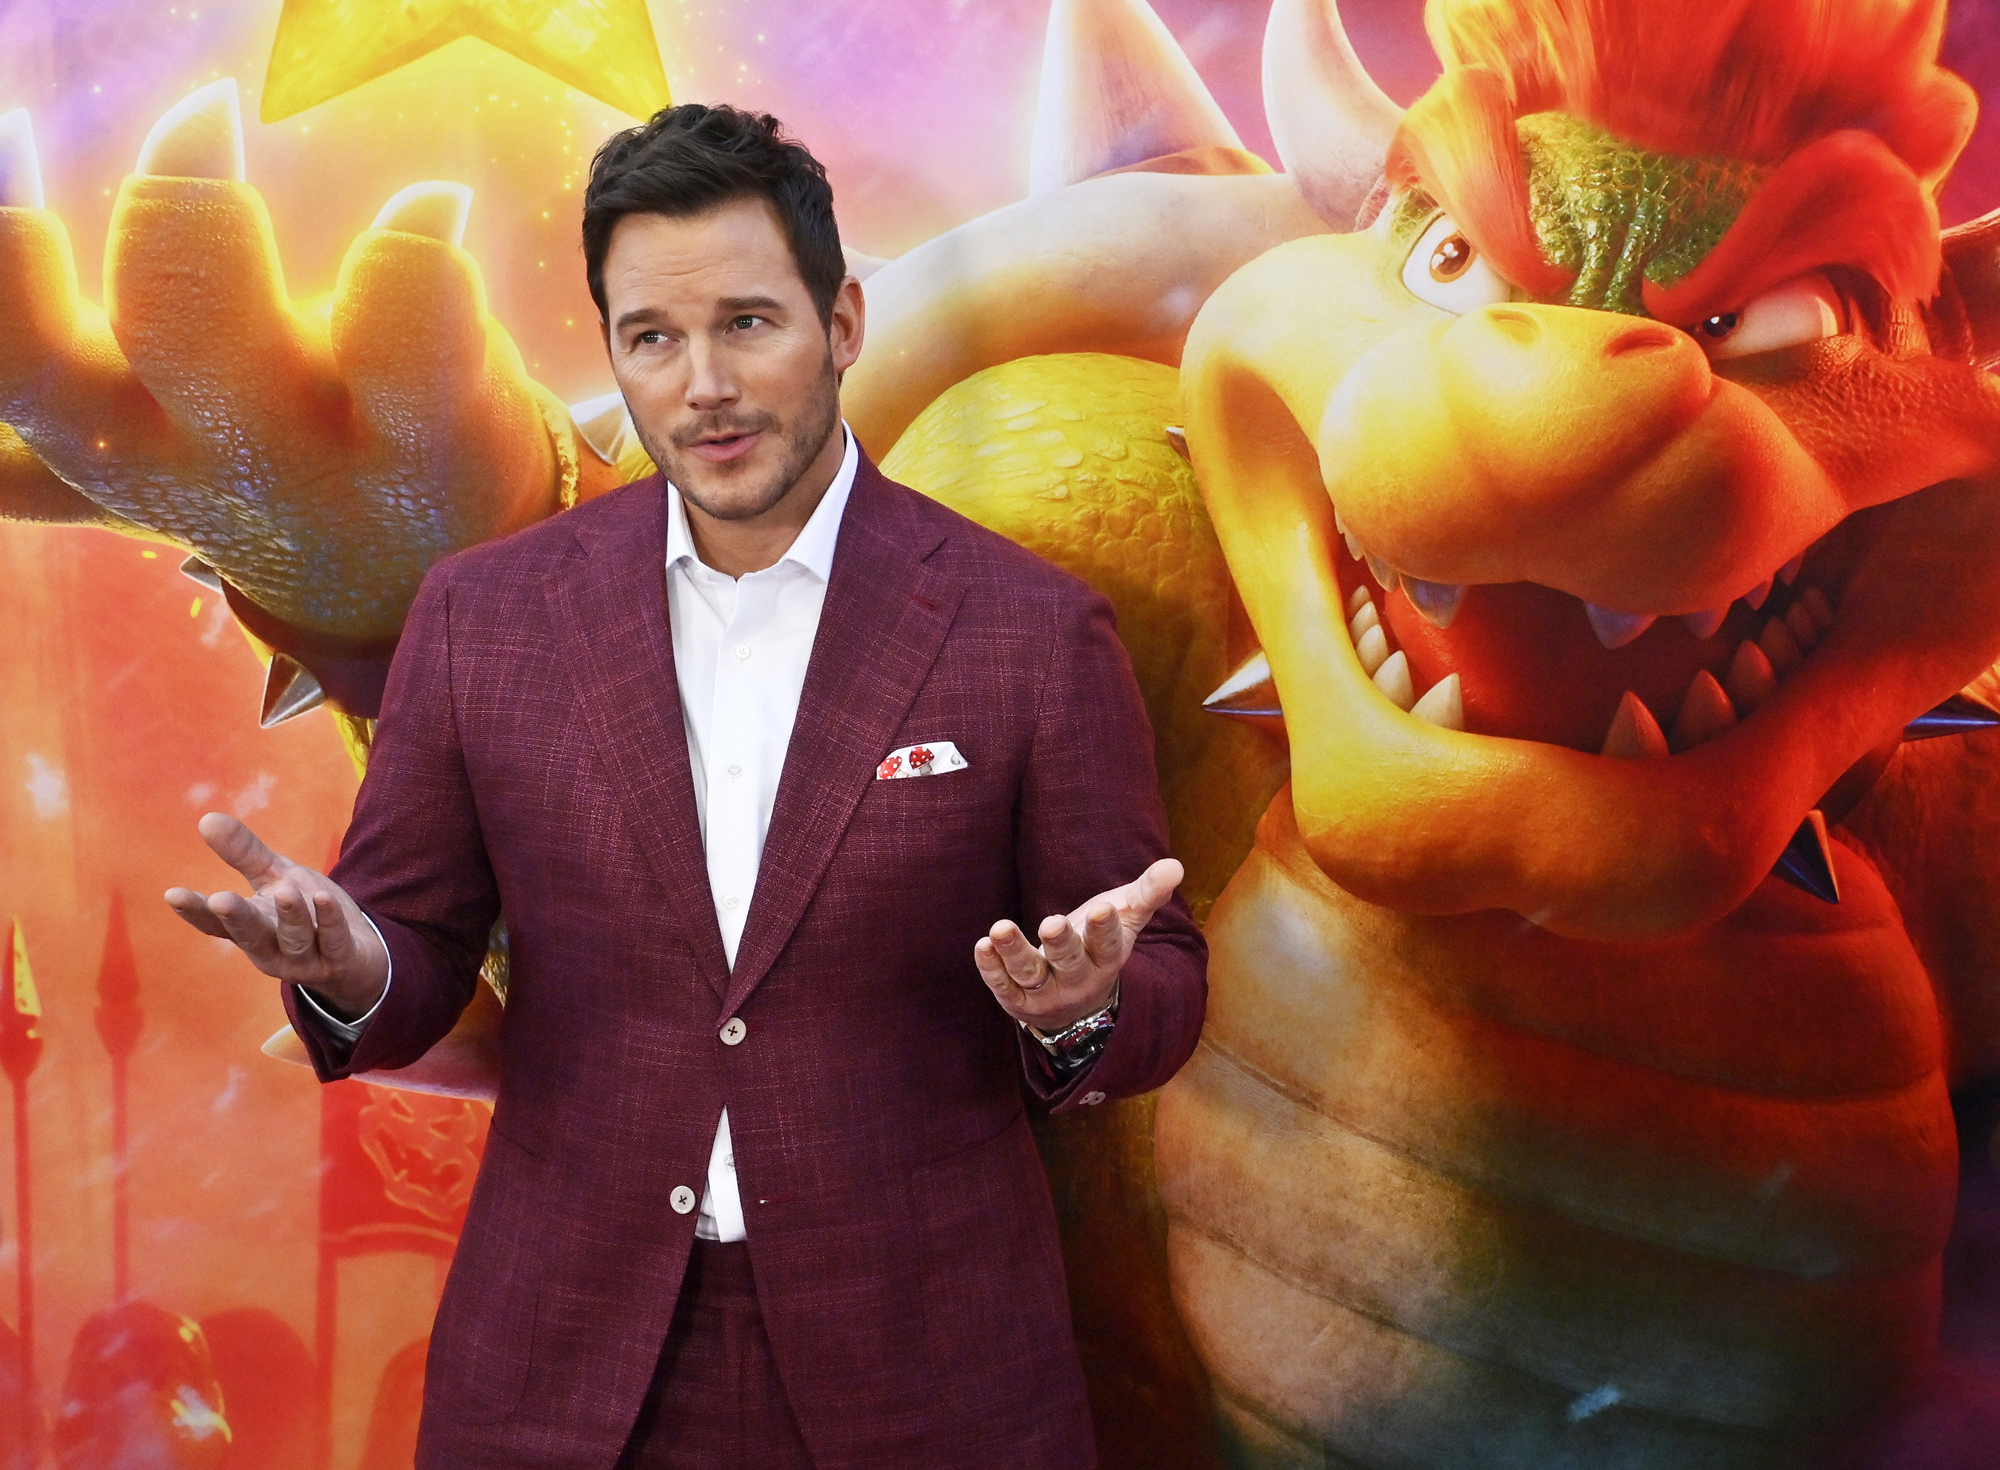 Watch: Charlie Day on 'Super Mario Bros.' film: 'They don't tell